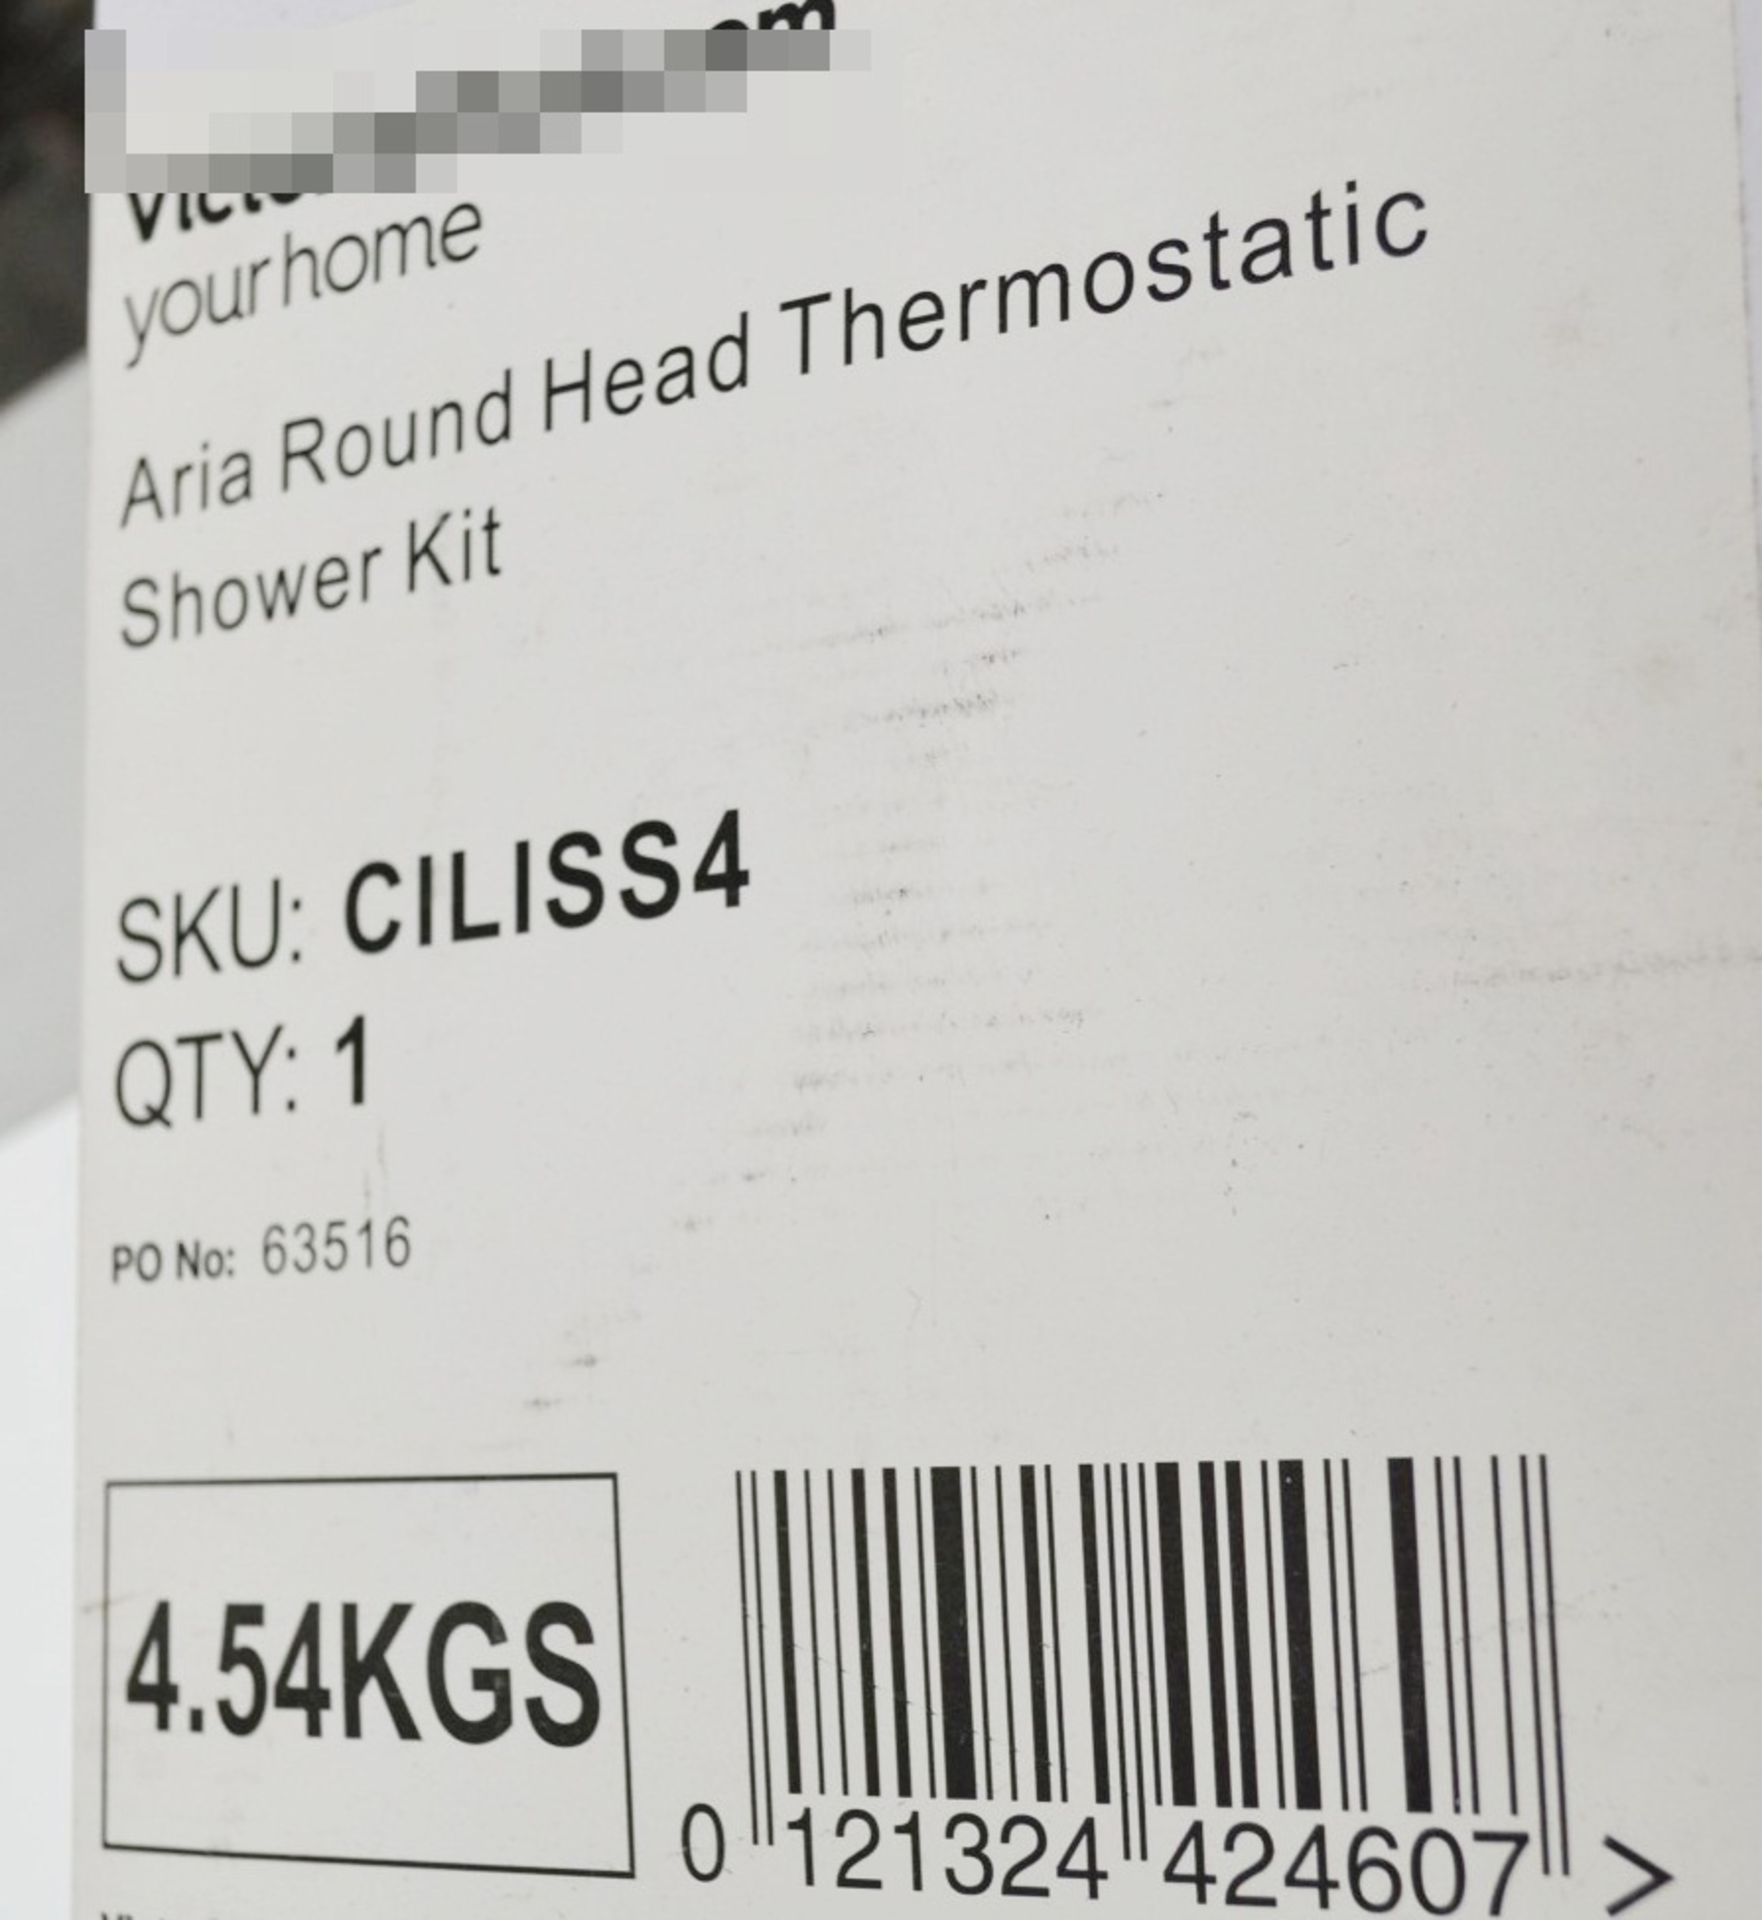 1 x ARIA Round Head Thermostatic Shower Kit - Chrome - CILISS4 - Ref: MBI027 - CL190 - Location: - Image 5 of 15